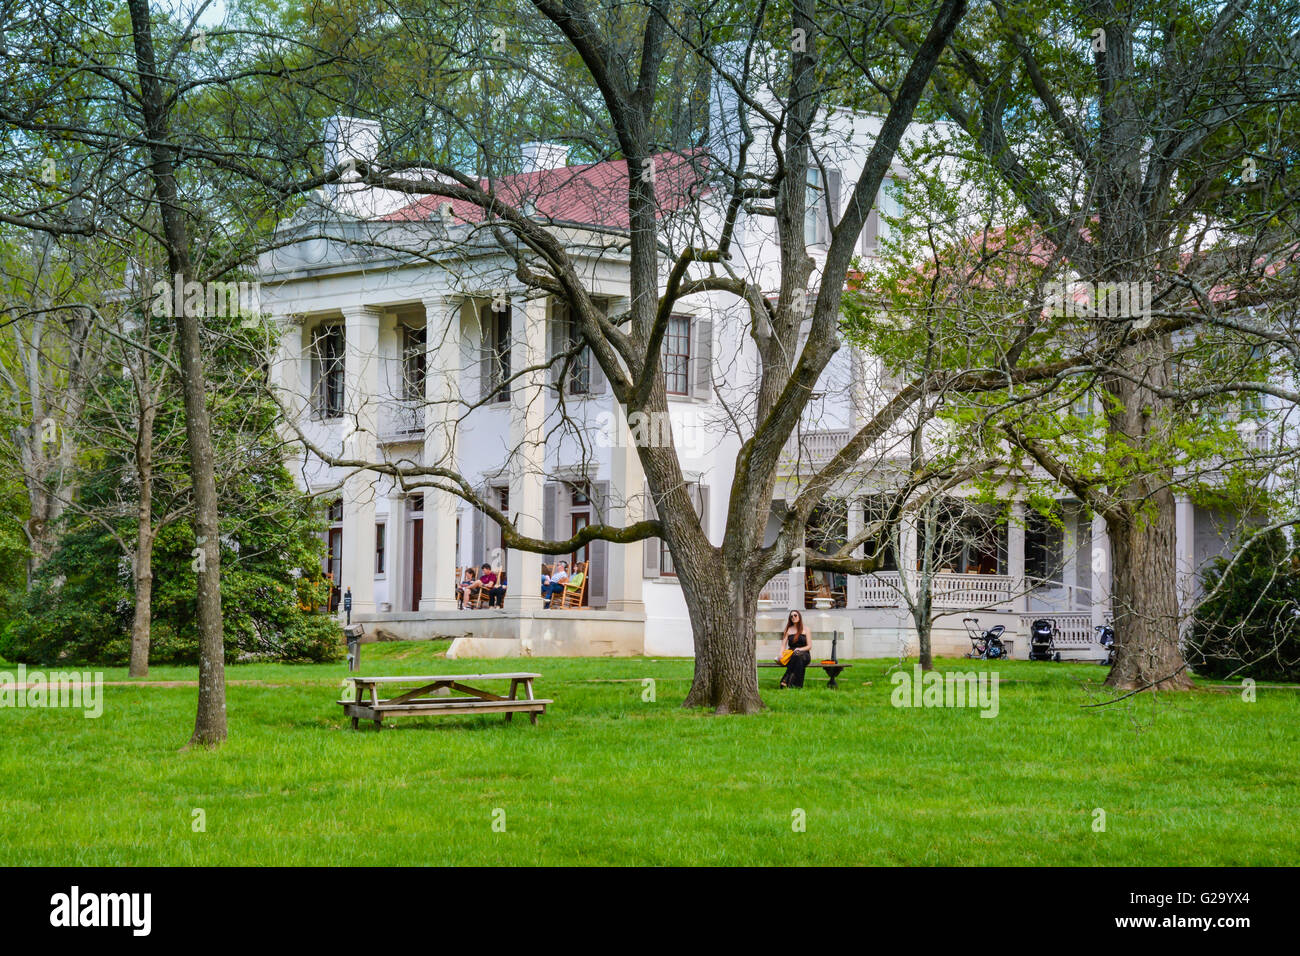 Tourists enjoy the veranda and tree covered grounds of The Belle Meade Plantation Mansion in Spring time in Nashville TN Stock Photo